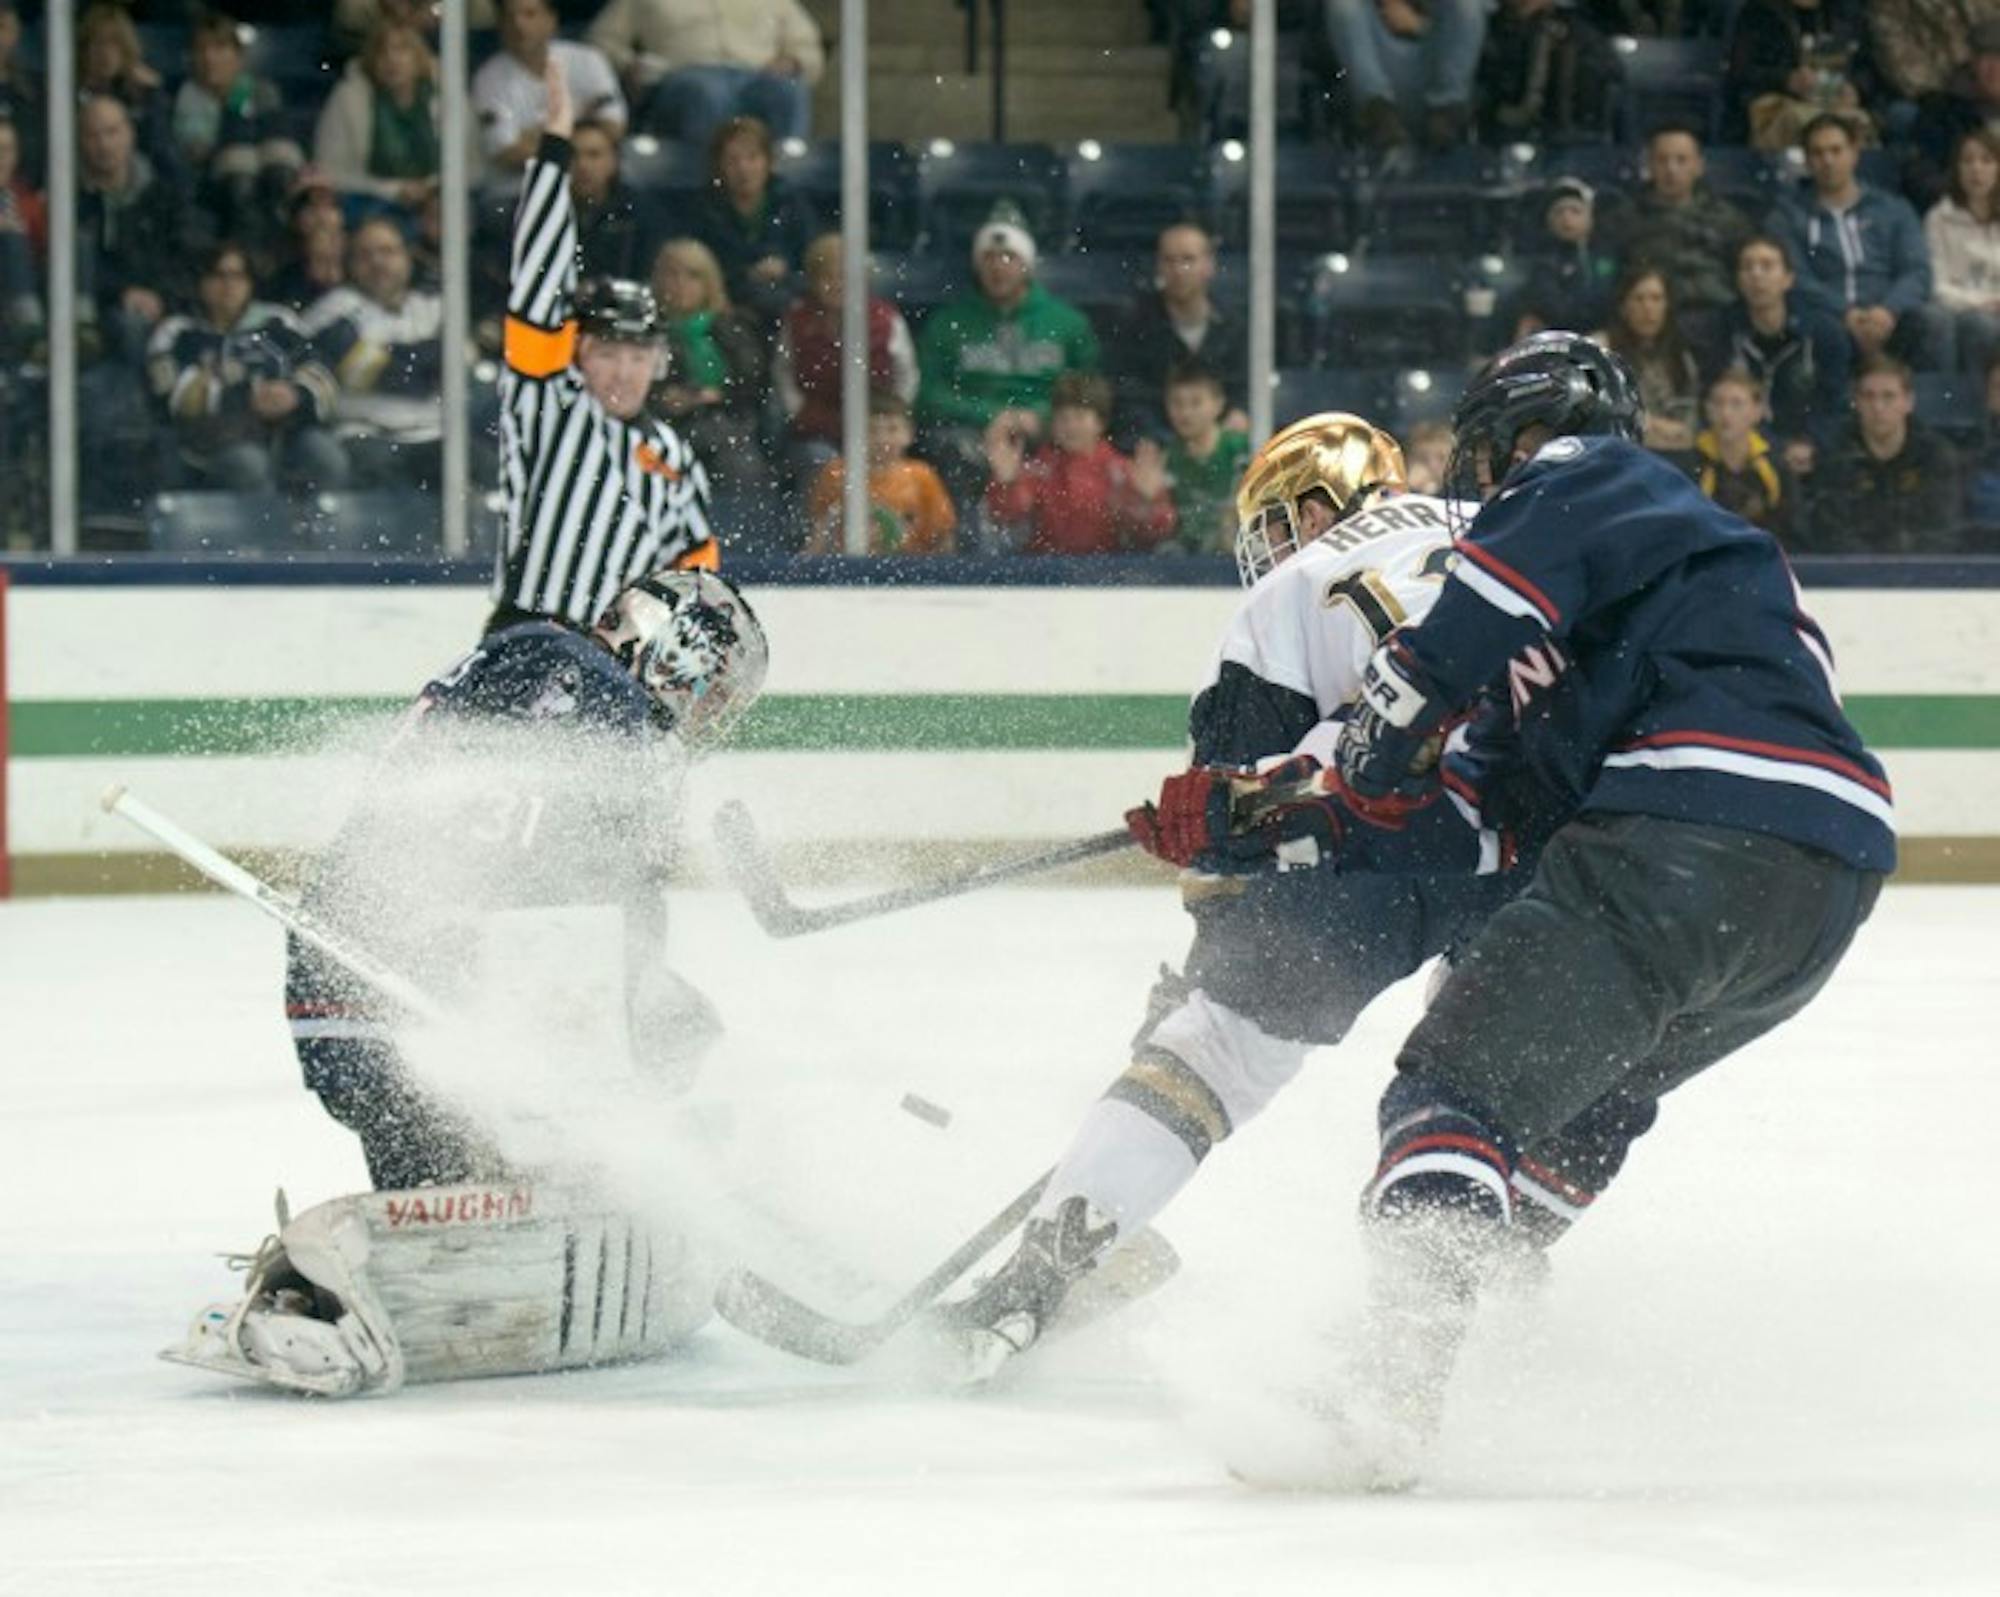 Irish junior left wing Sam Herr takes a shot on goal in a 3-3 overtime tie against Connecticut in the Compton Family Ice Arena on Jan. 16.